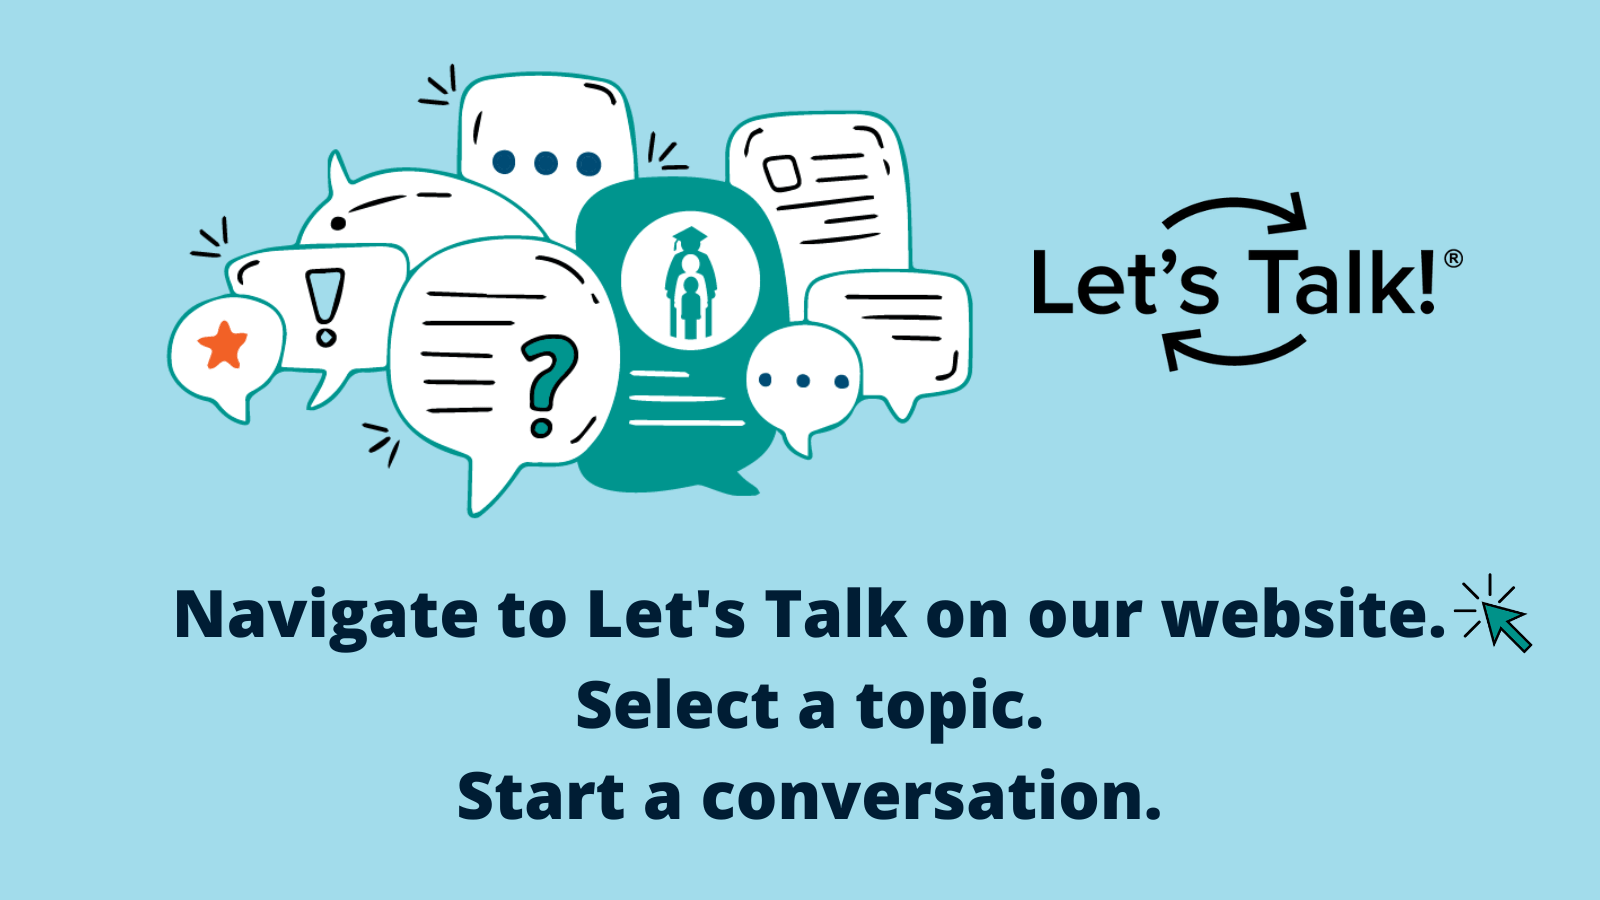 A collage of various speech bubbles appears above text that reads, "Navigate to Let's Talk on our website. Select a topic. Start a conversation." Image sized for Twitter.